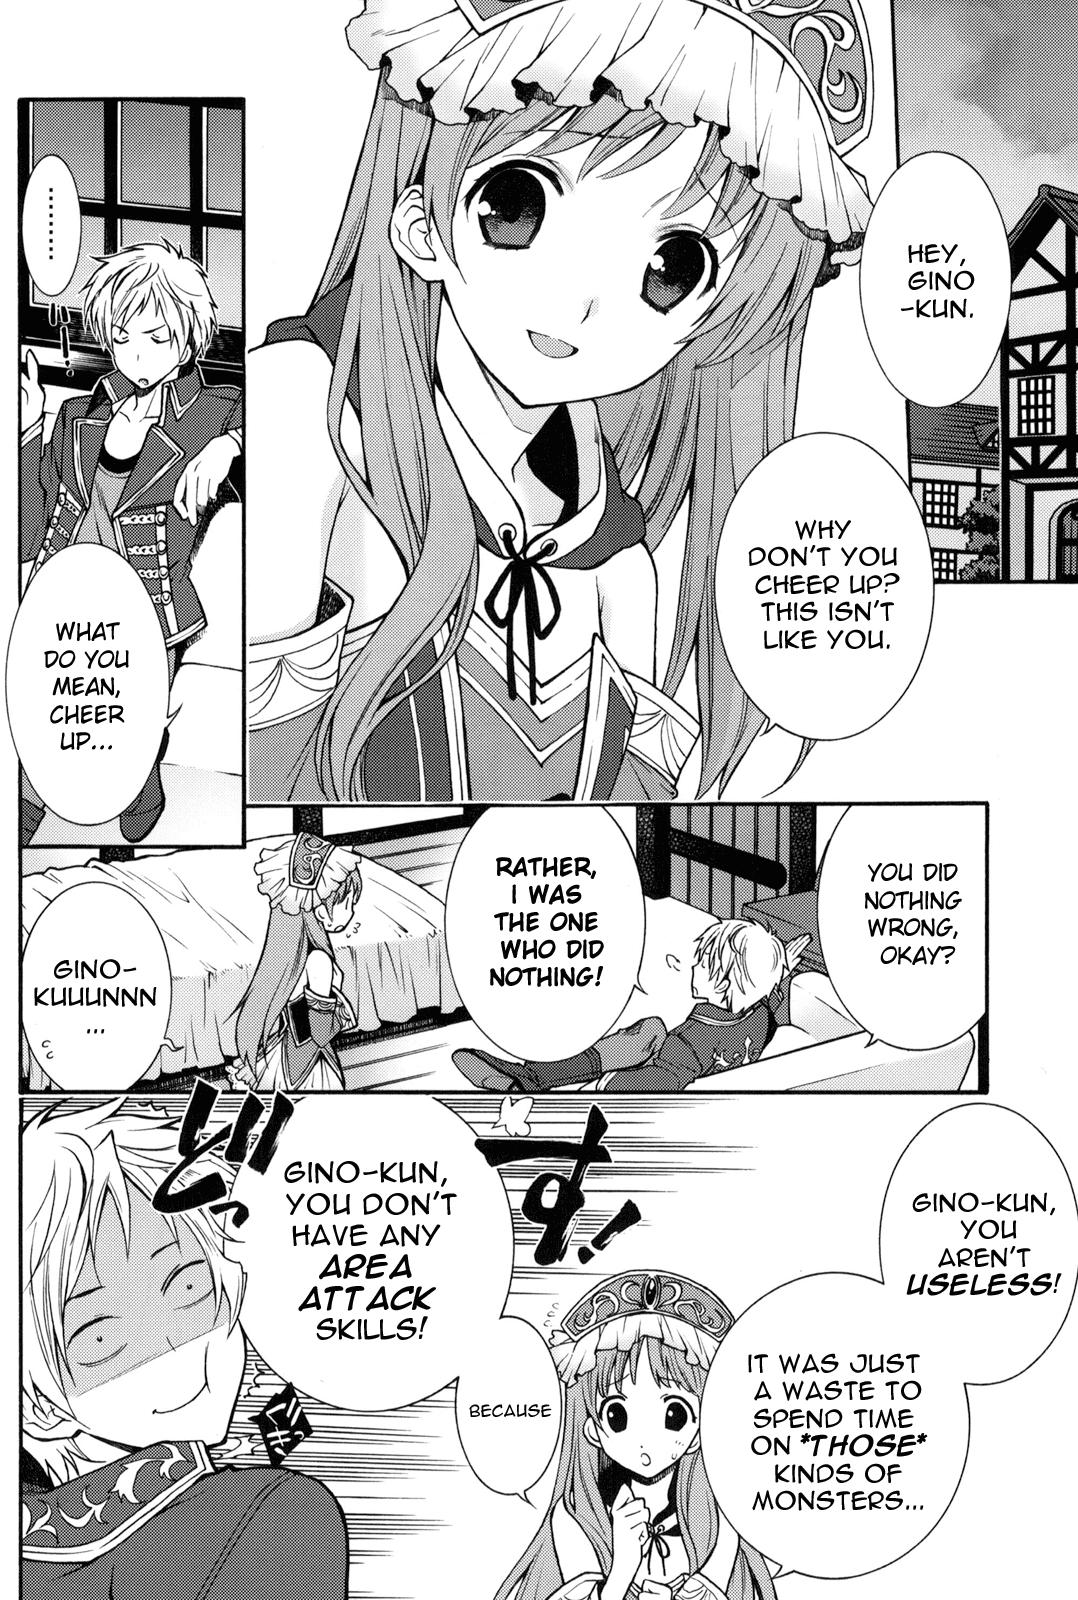 Head Can you master baby? - Atelier totori Atelier meruru Free Amature - Page 5